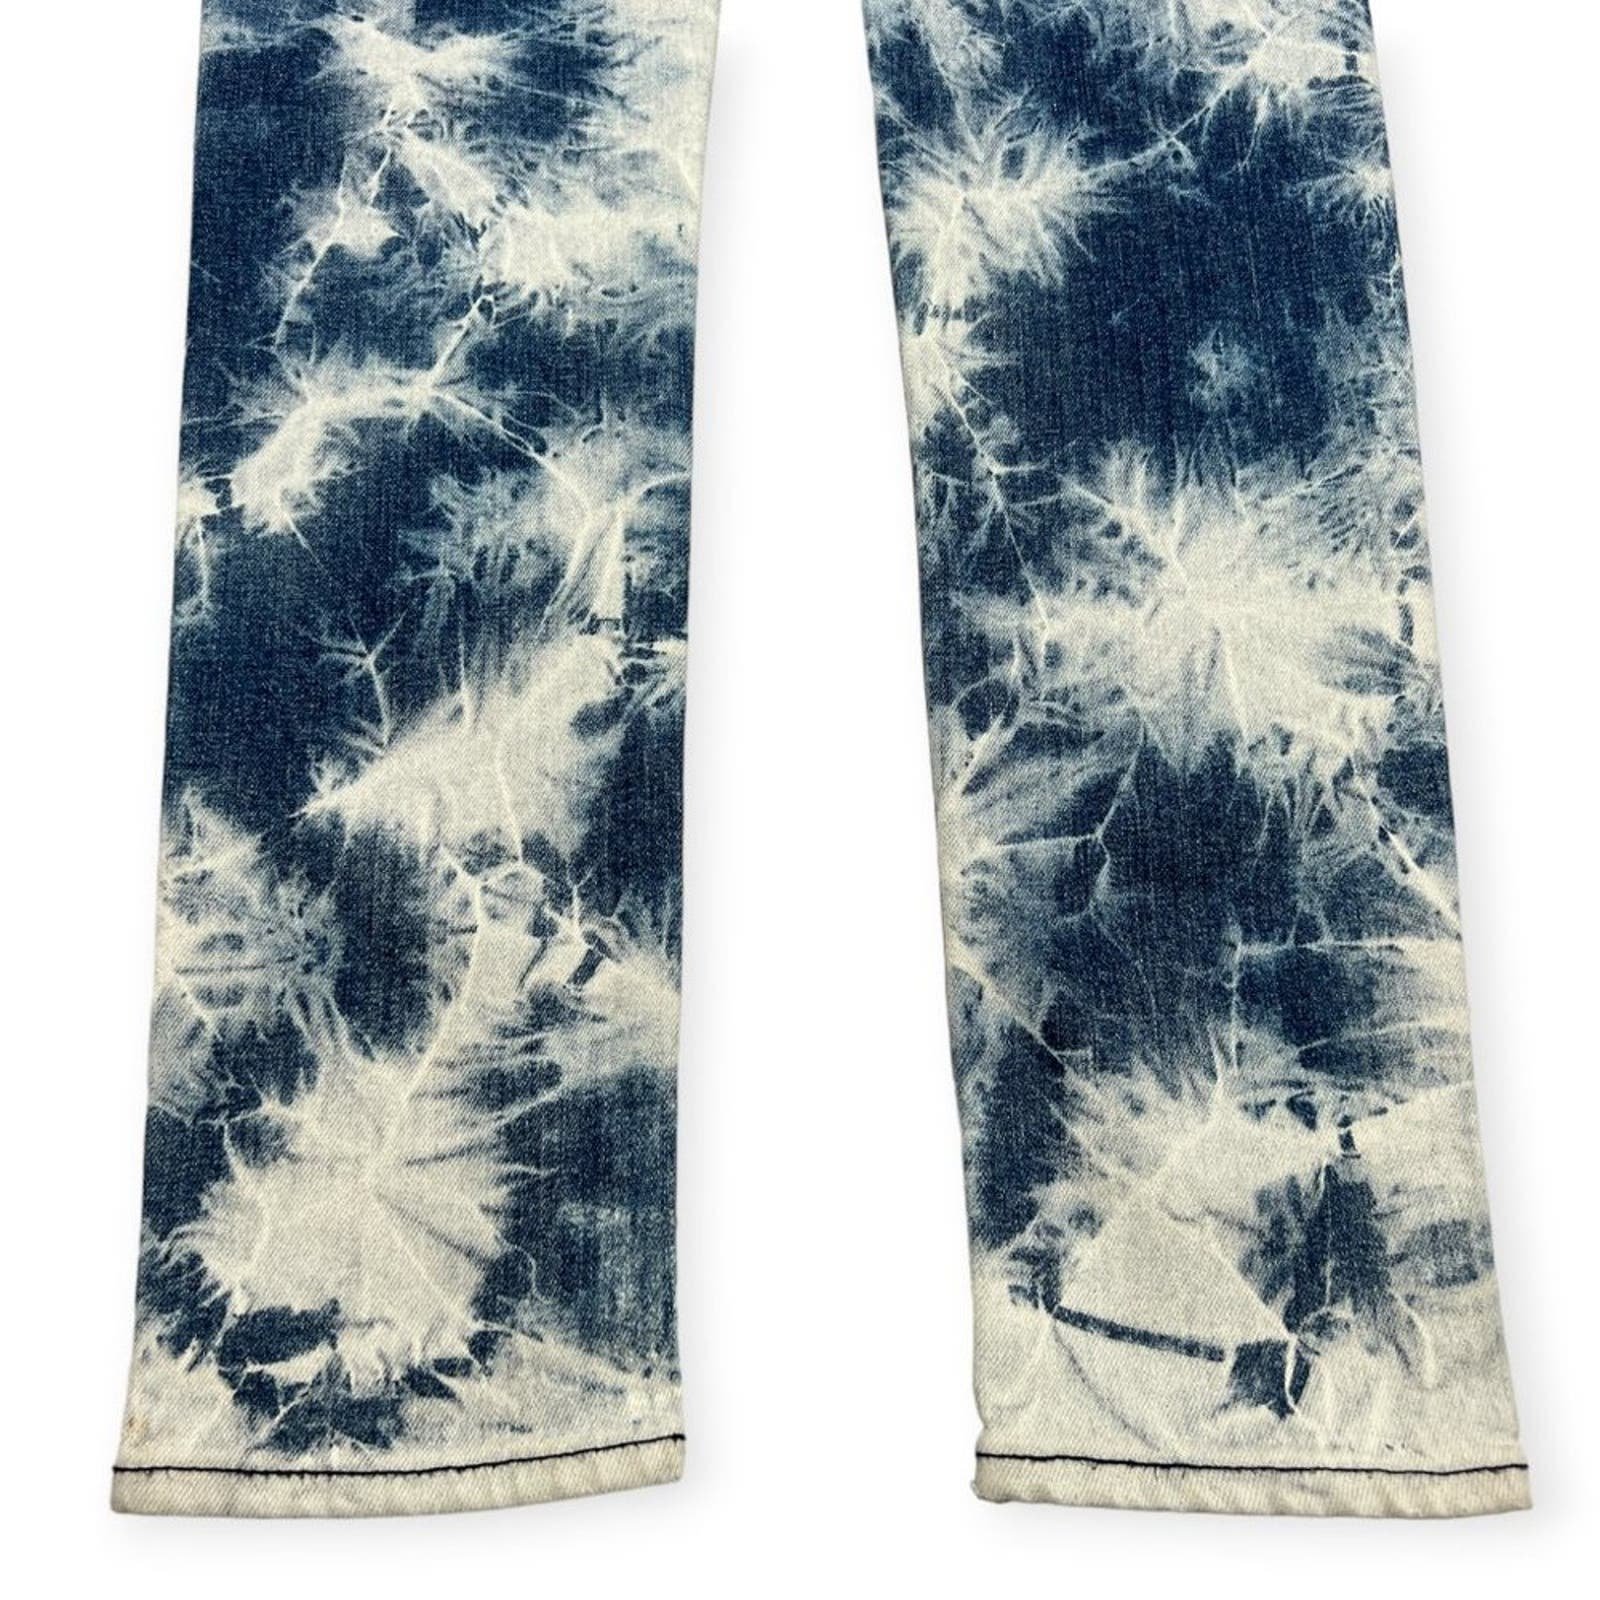 Affordable Cult of Individuality Gypsy High Rise Jeans Womens 25 Skinny Tie Dye Blue Denim hkoFqkHMd High Quaity